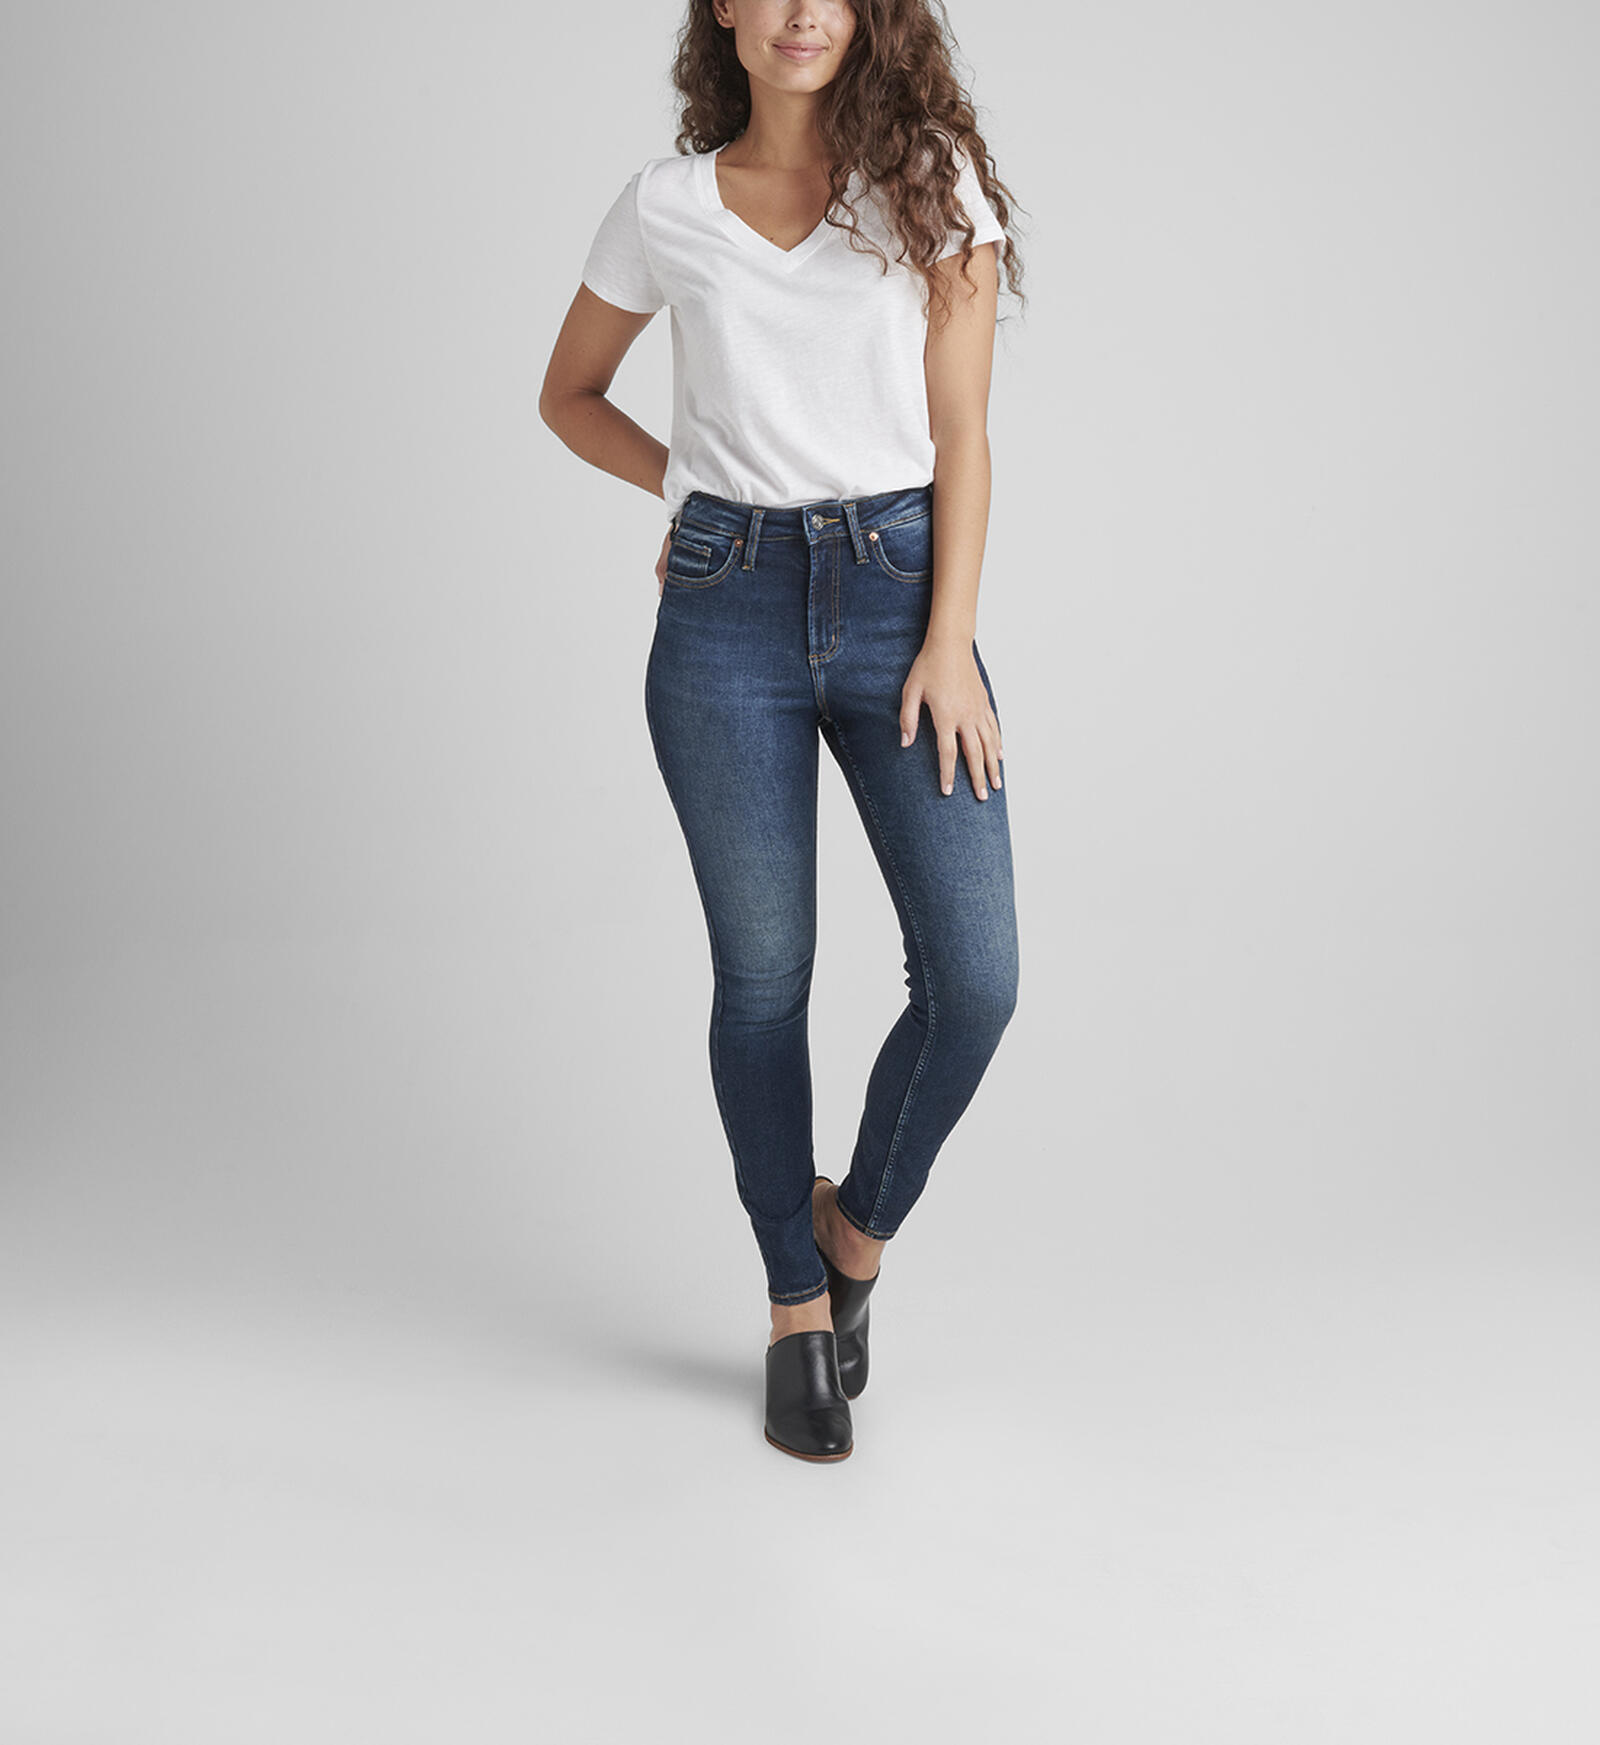 Buy Infinite Fit Relaxed Straight Leg Jeans for USD 88.00